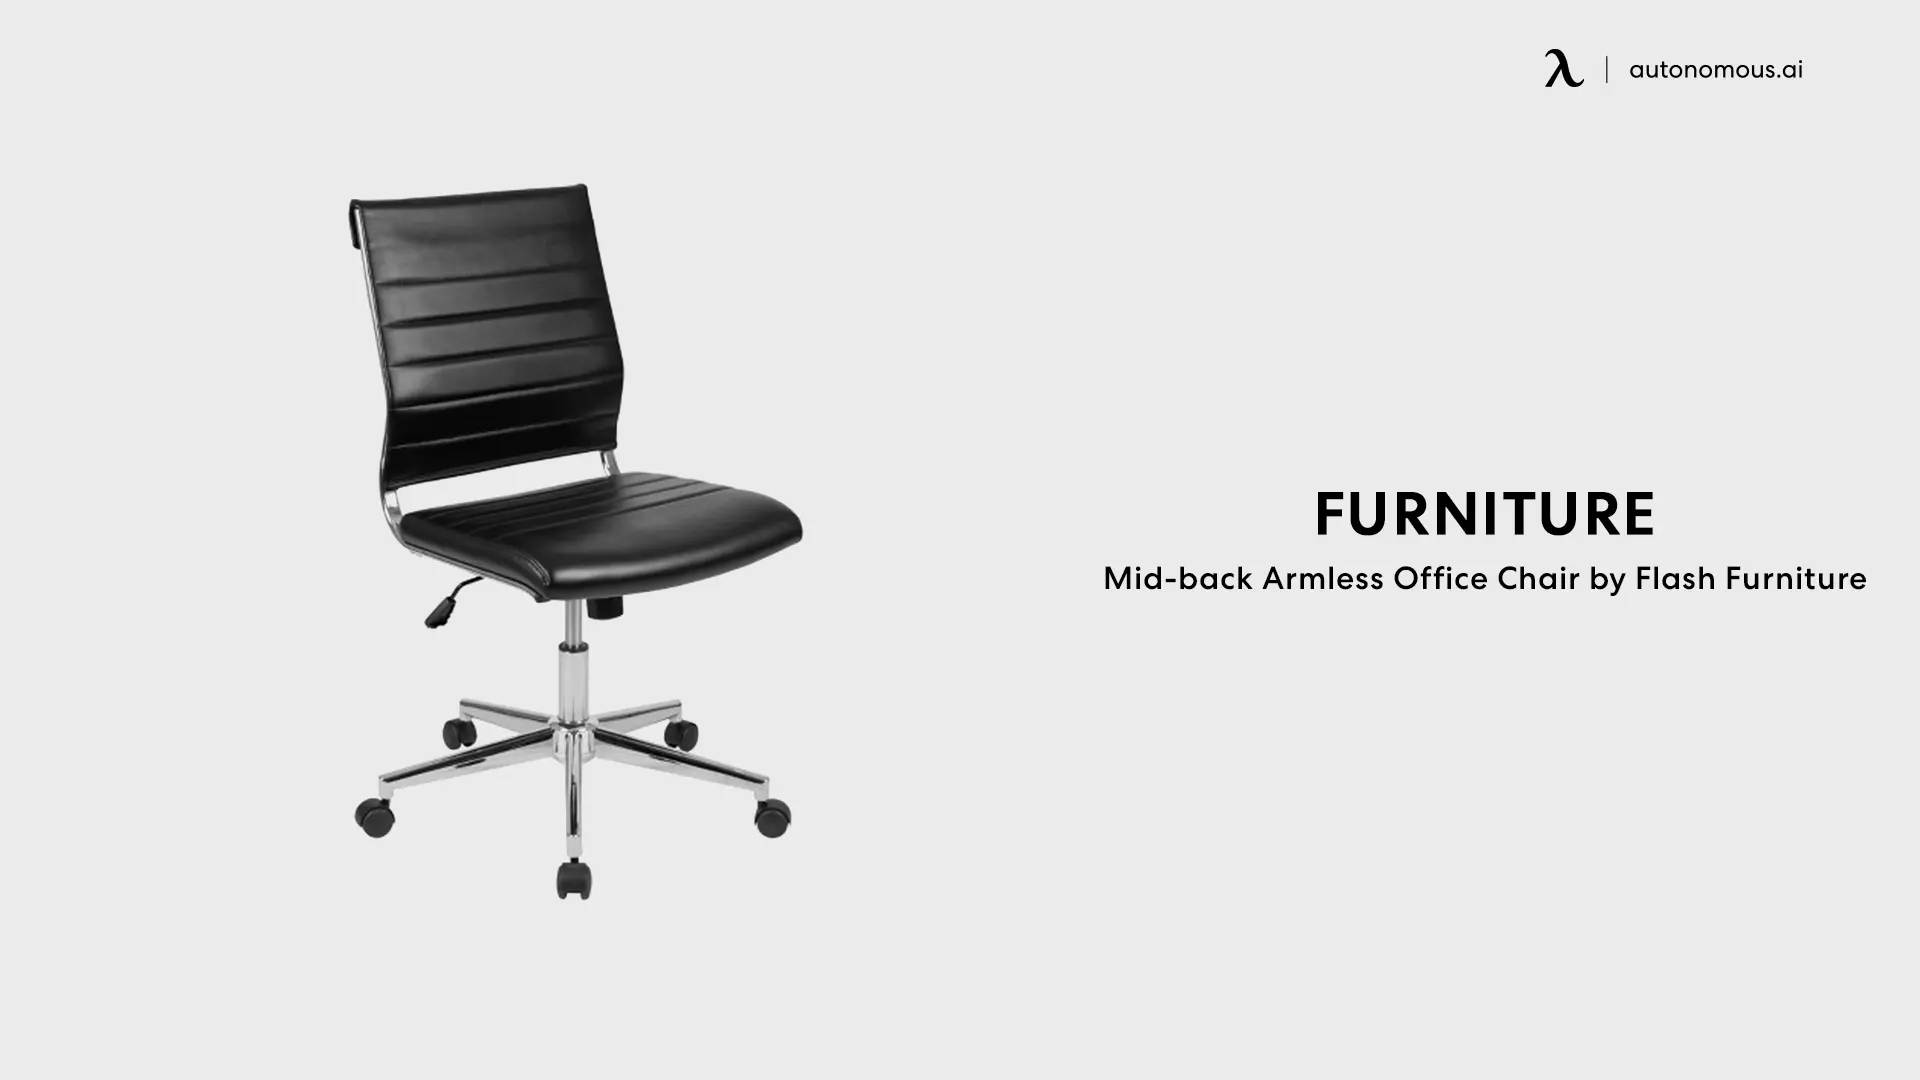 Mid-back Armless Office Chair by Flash Furniture